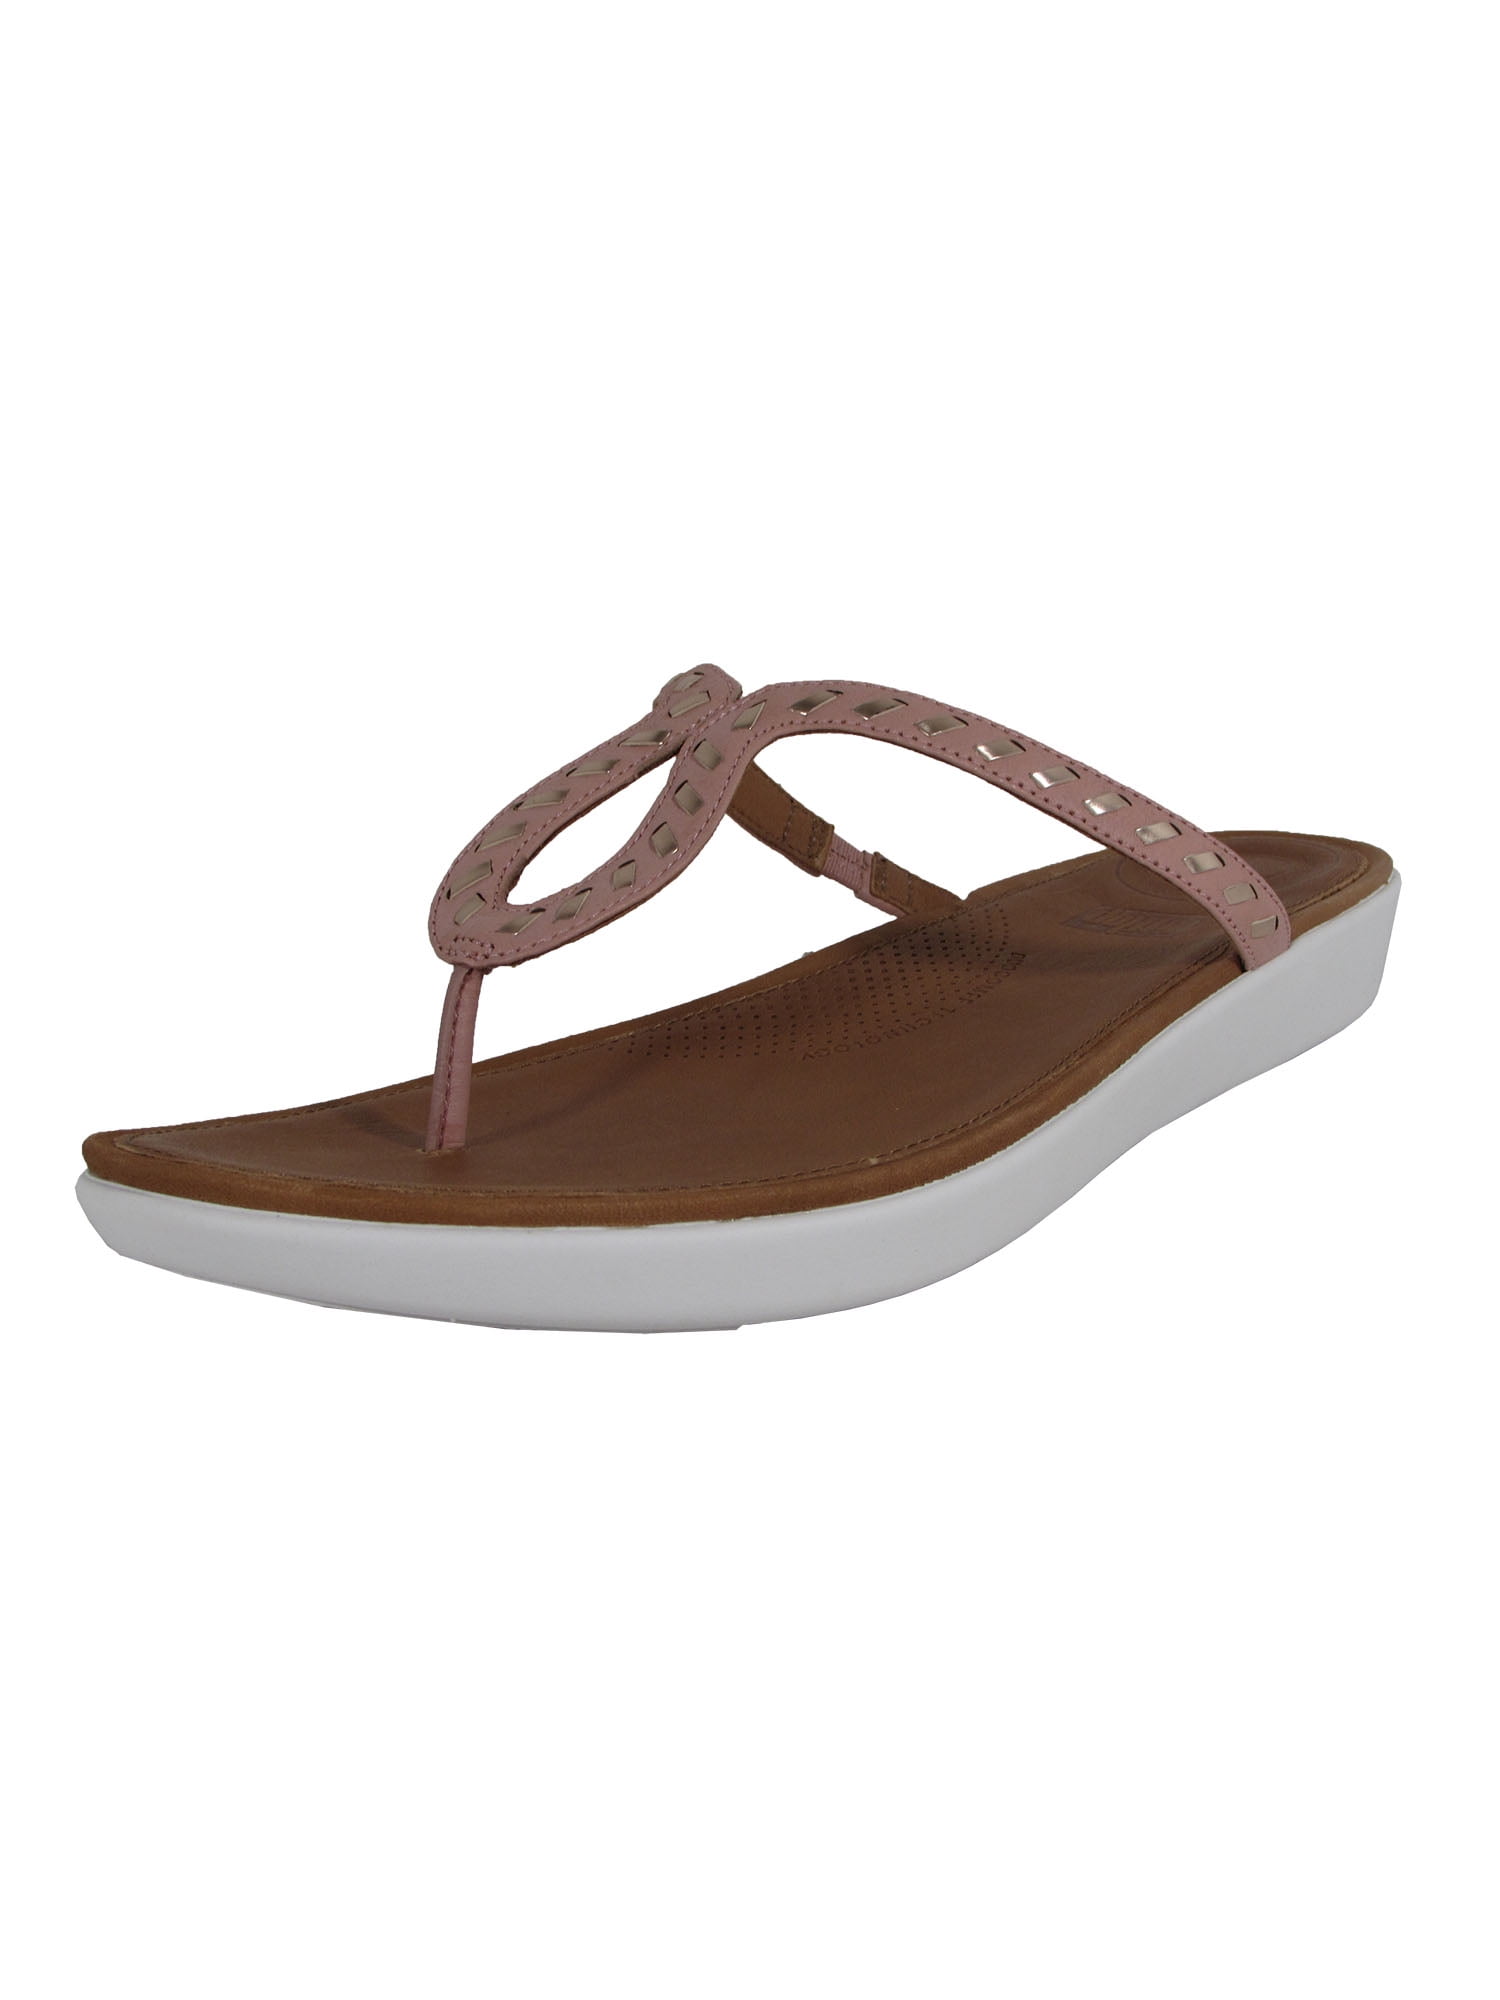 leather thong sandals women's